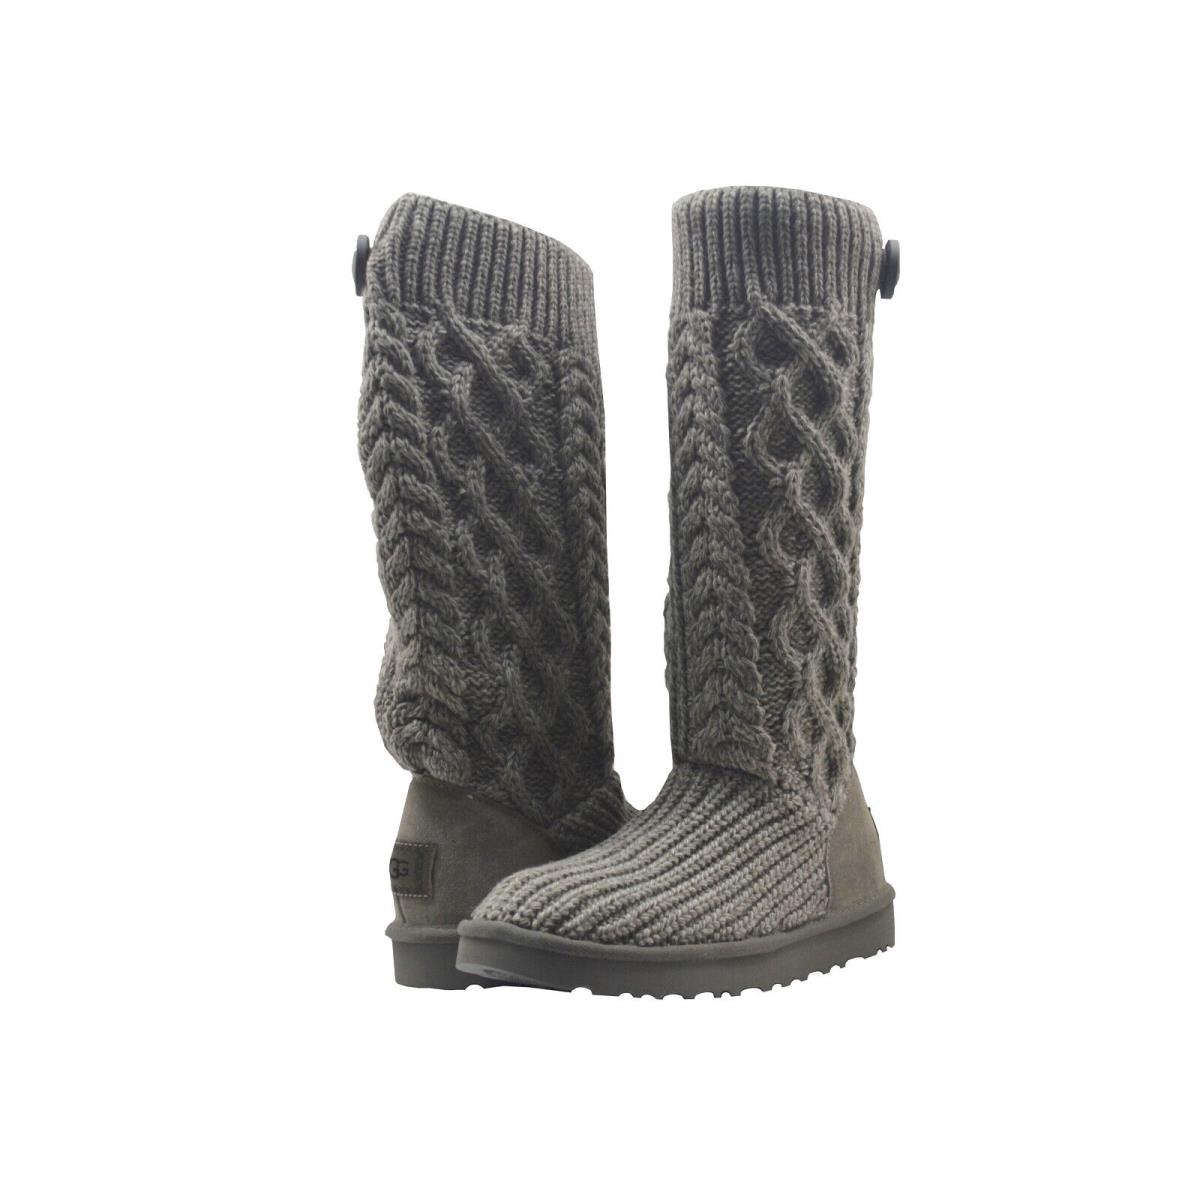 Women`s Shoes Ugg Classic Cardi Cabled Knit Boots 1146010 Grey - Gray